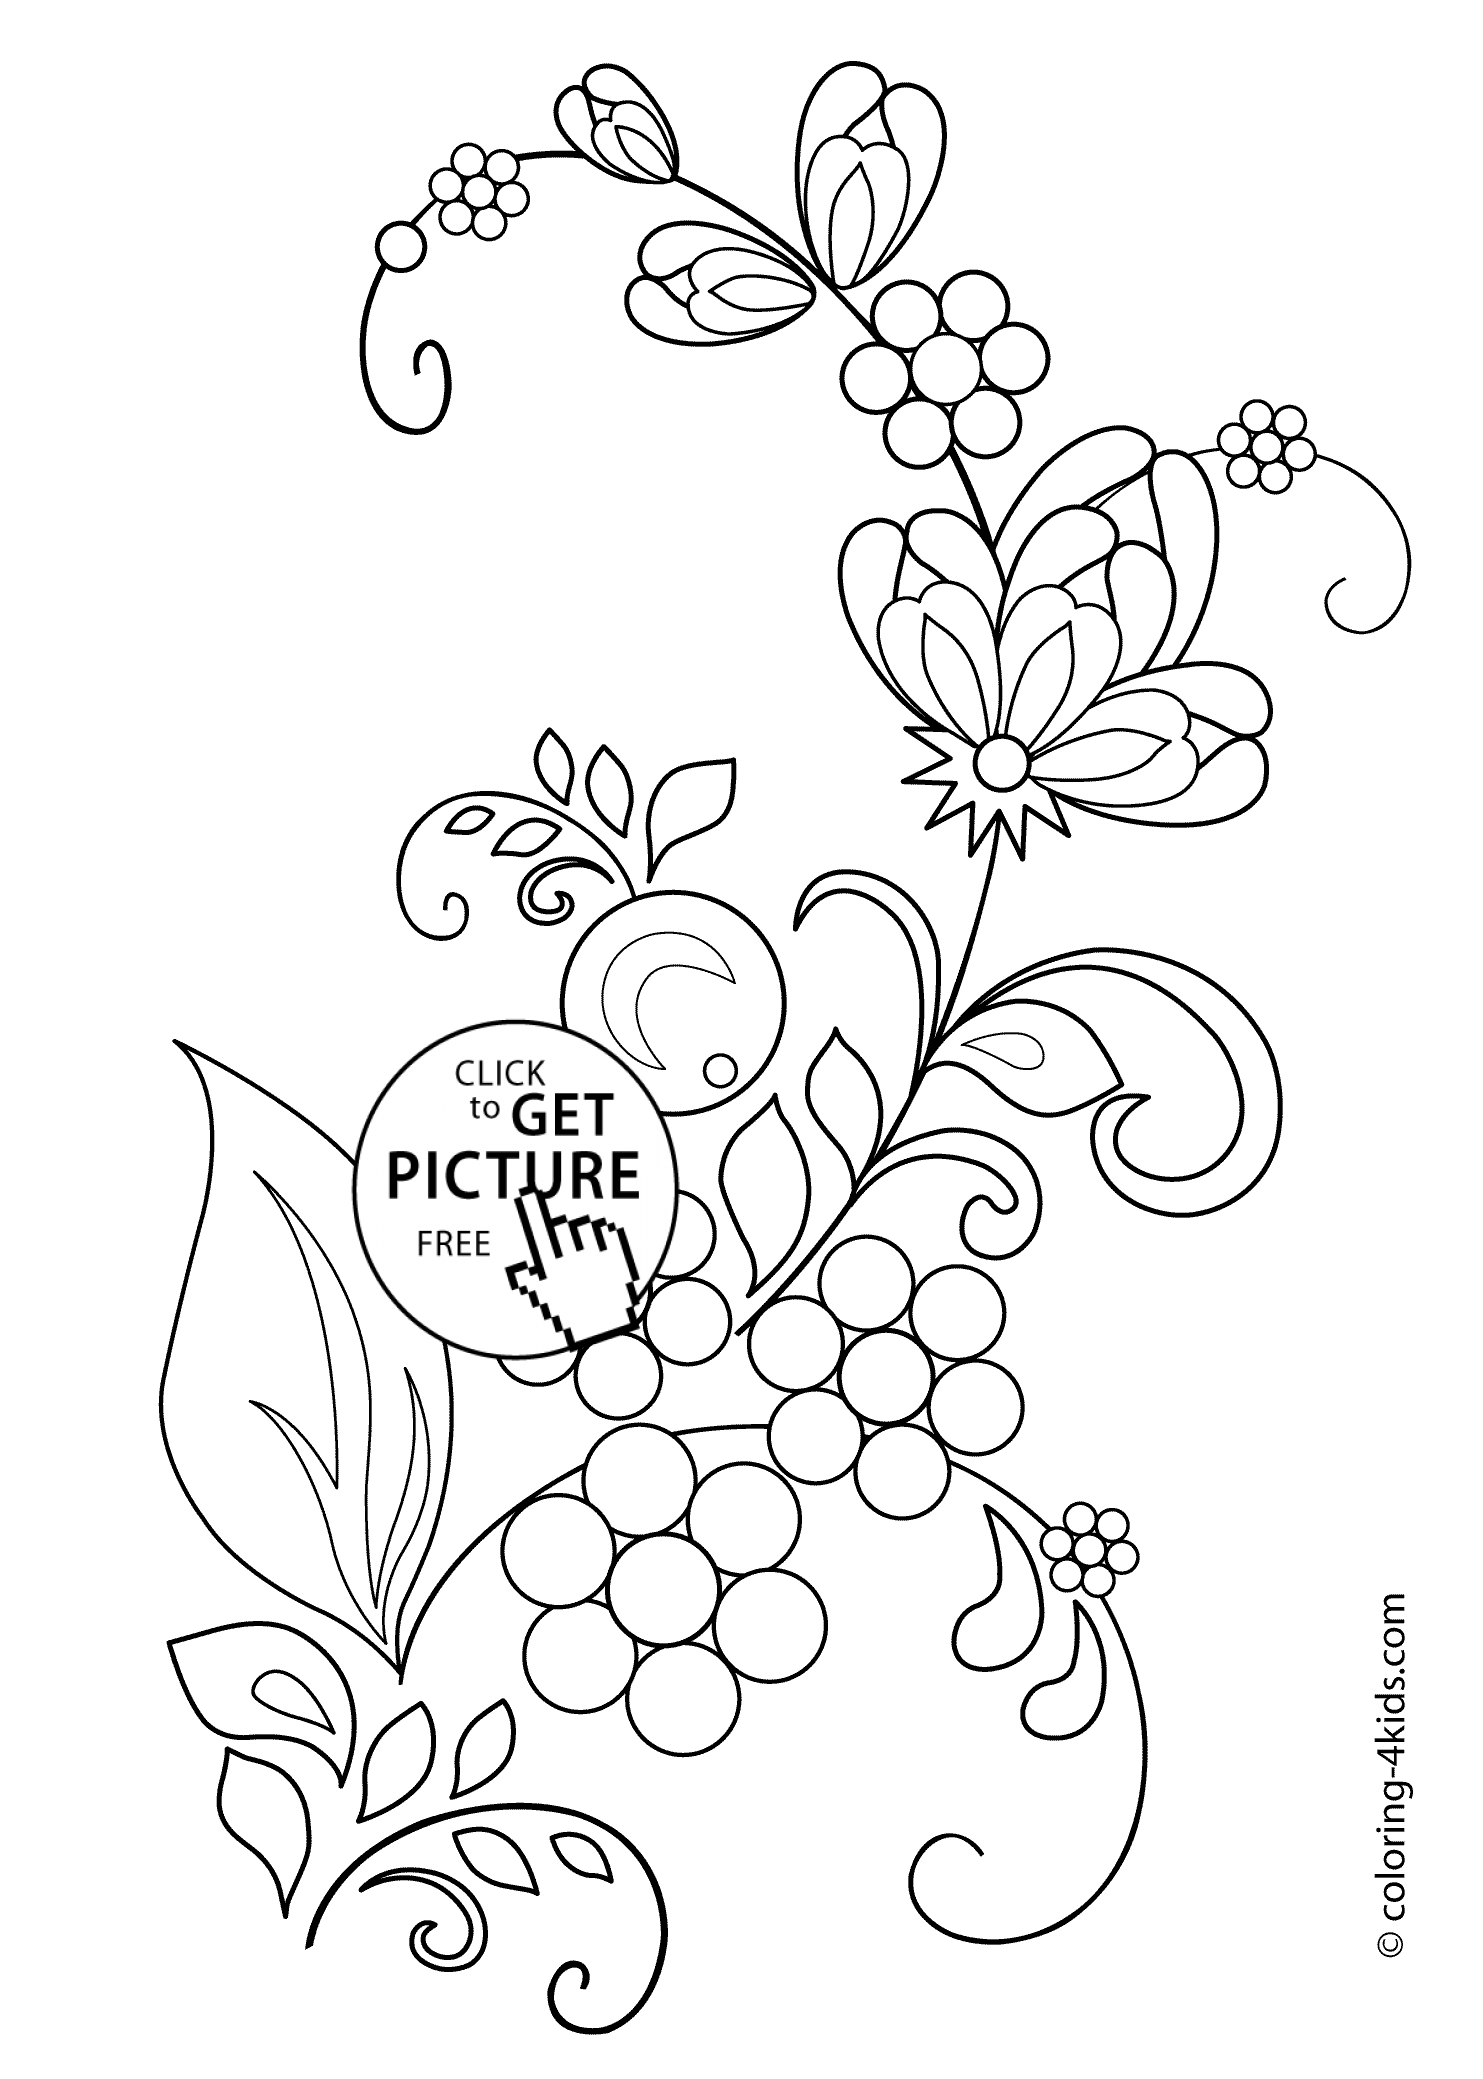 images of flowers to color beautiful flowers coloring pages for kids printable free of images flowers color to 